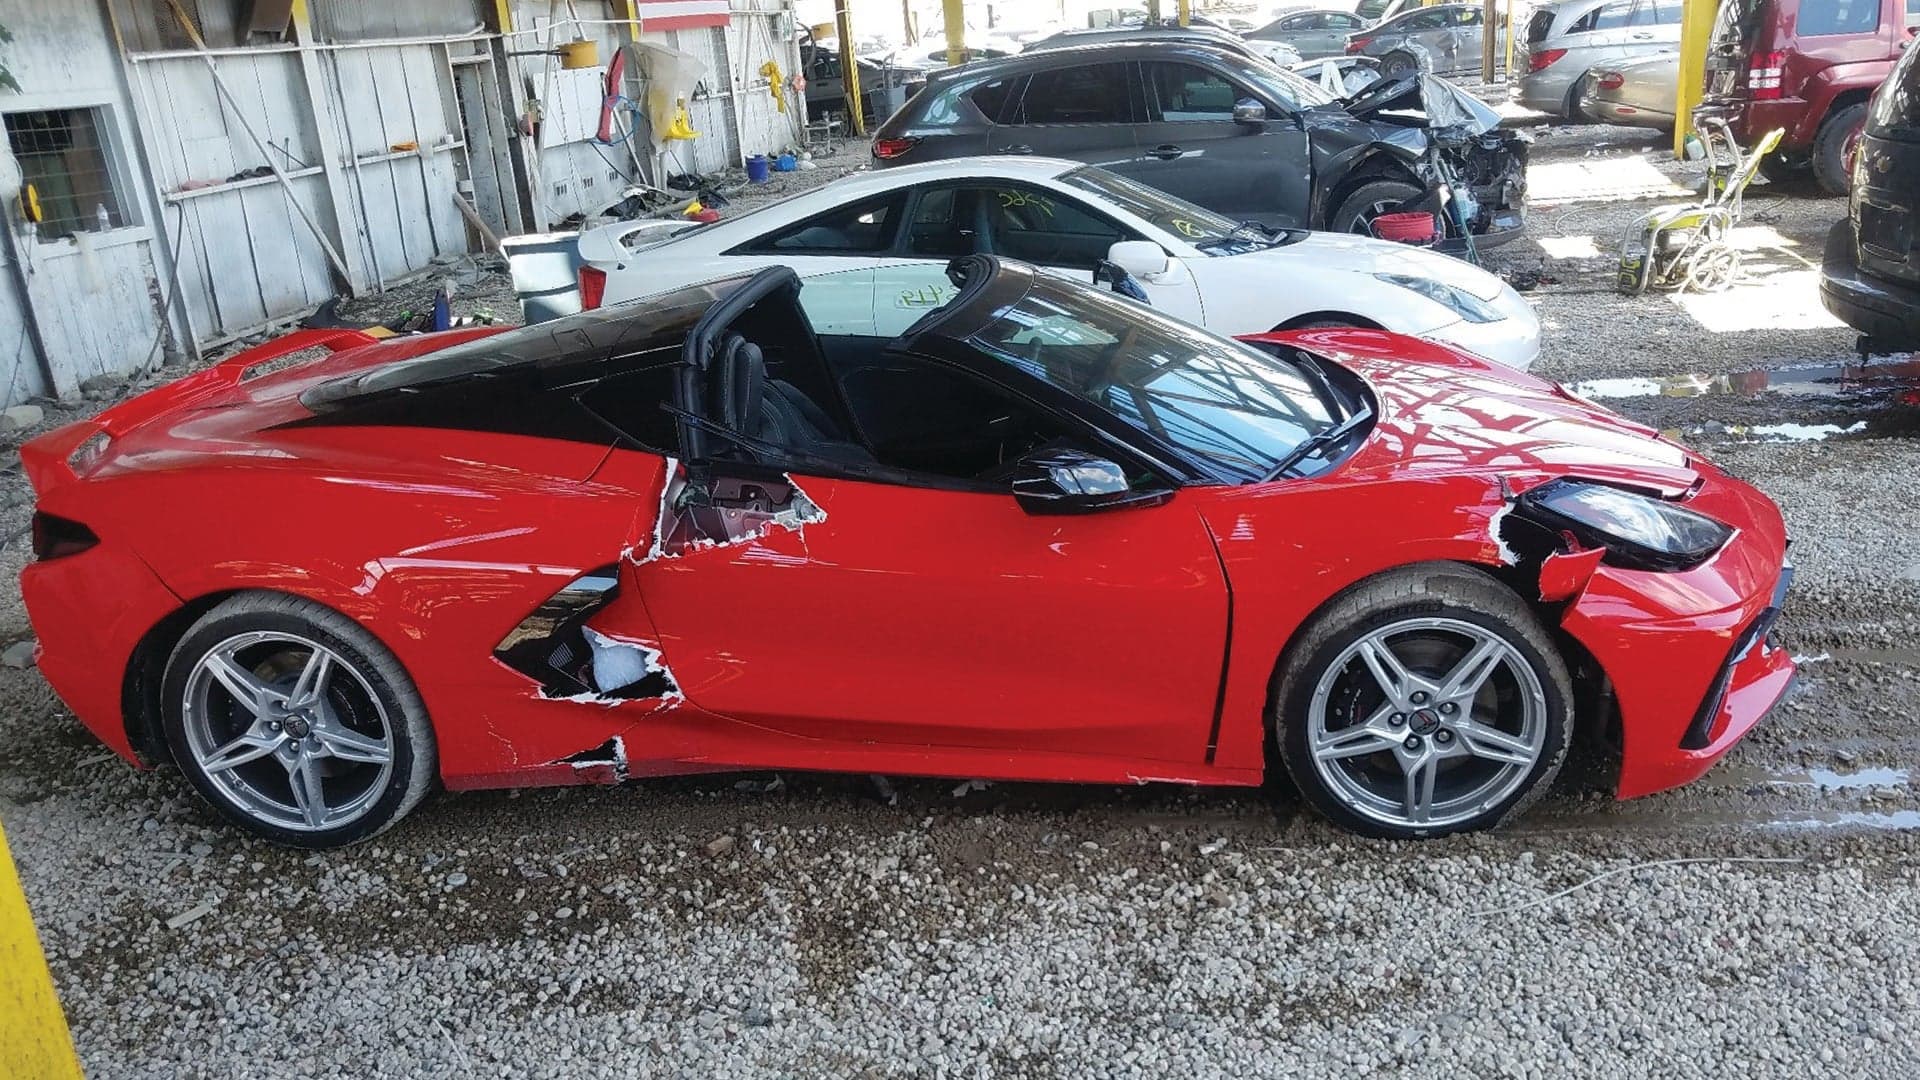 Want a Cheap C8 Corvette? Buy the One That Fell Off a Dealer’s Lift